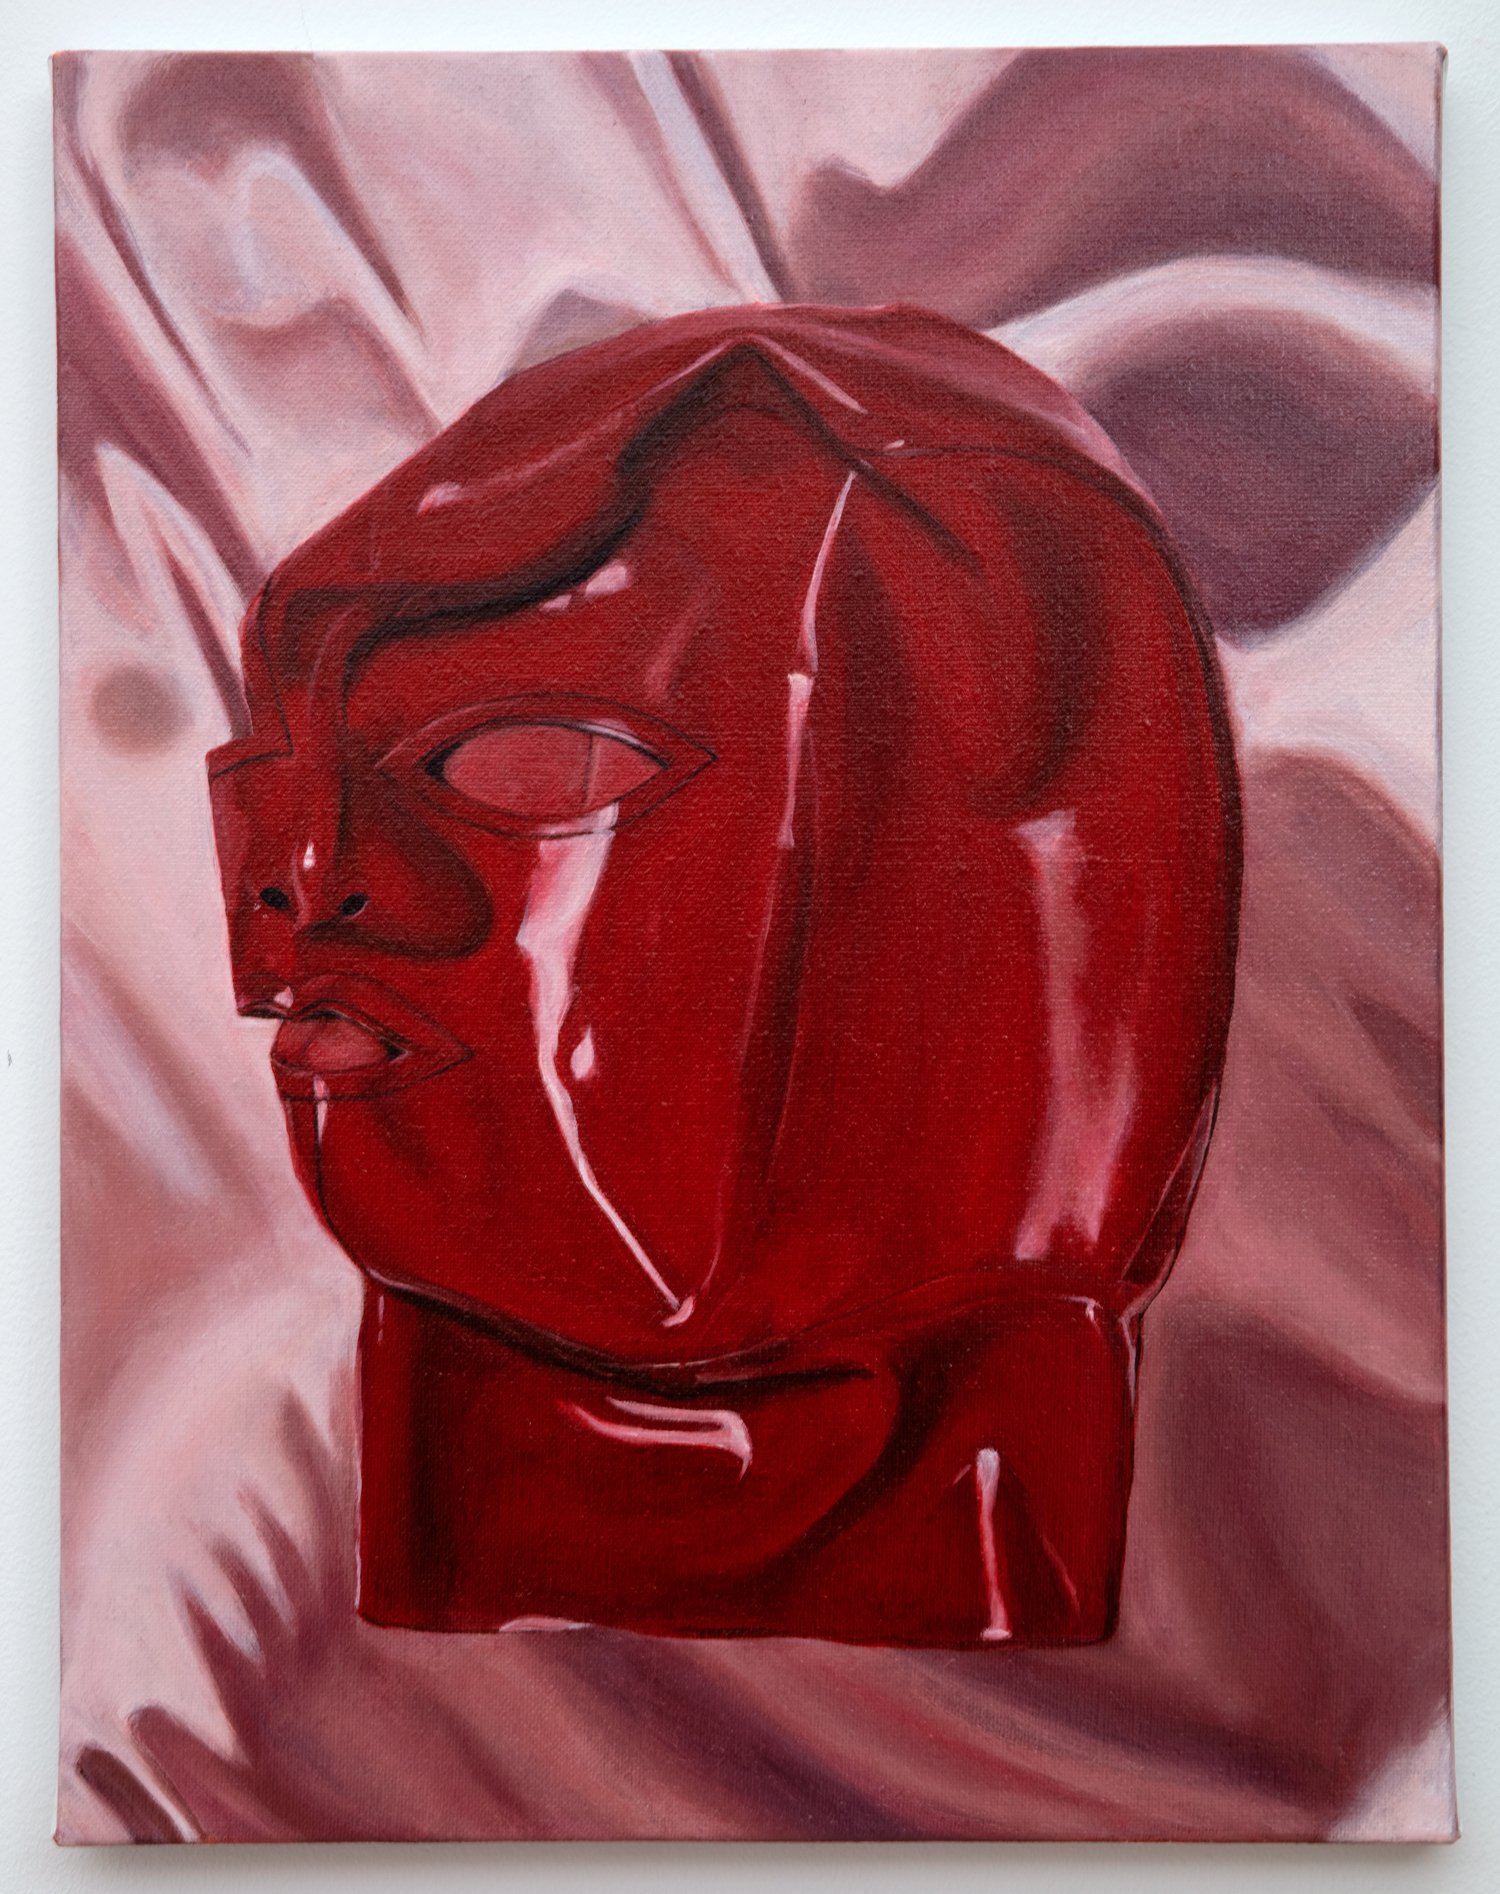   Scarlet Armour , 2022, Oil on Linen, 14 x 18 inches   